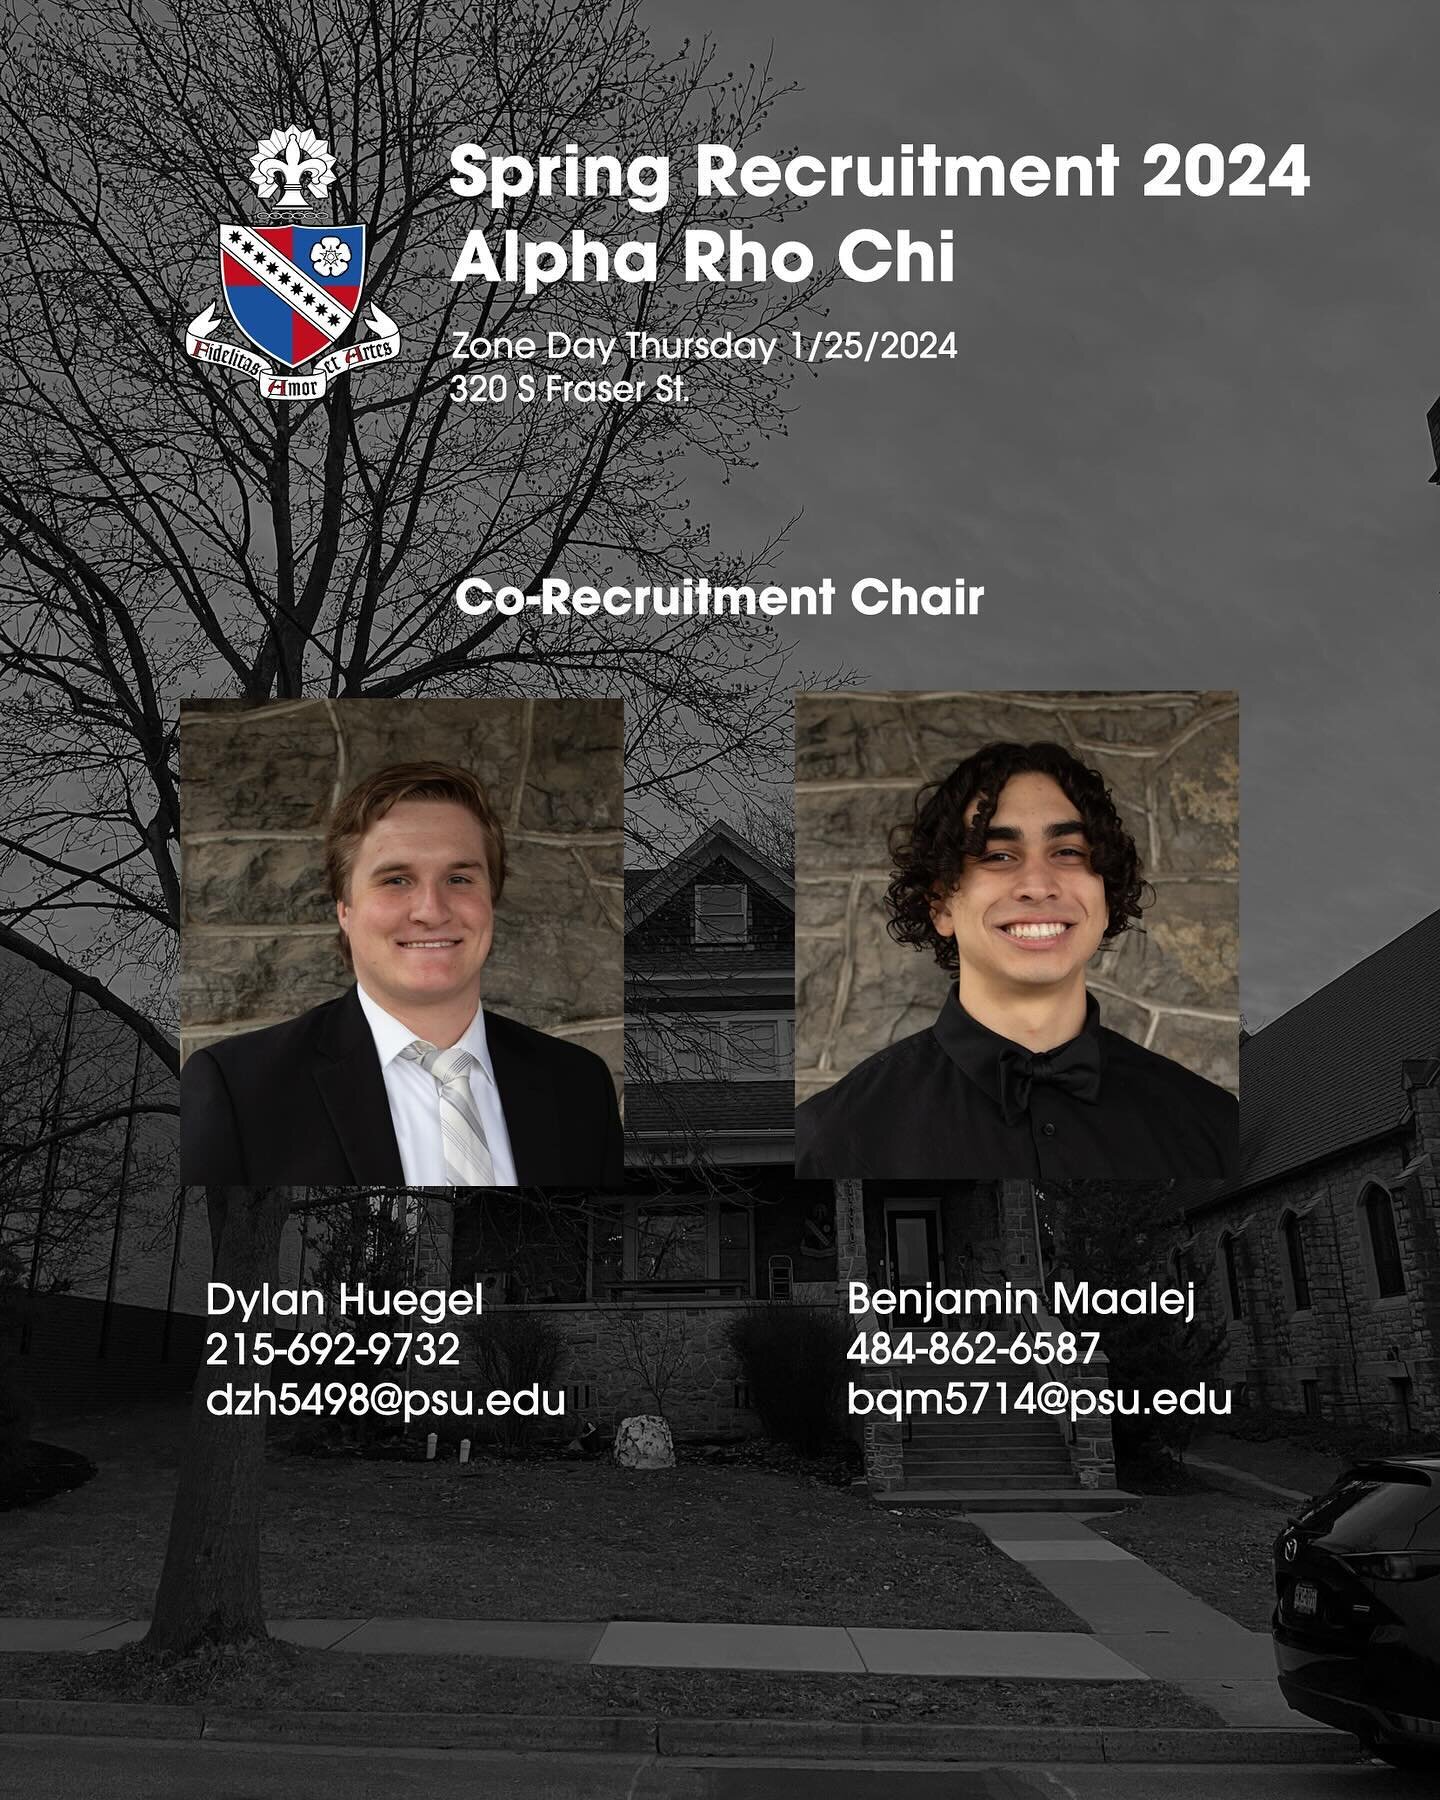 Our Zone Day is tomorrow, Thursday the 25th at the APX House. If you&rsquo;re interested in joining our fraternity please stop in between 4:30 and 8:00. This is a great way to preface recruitment week and we hope to see you all there! If you have any